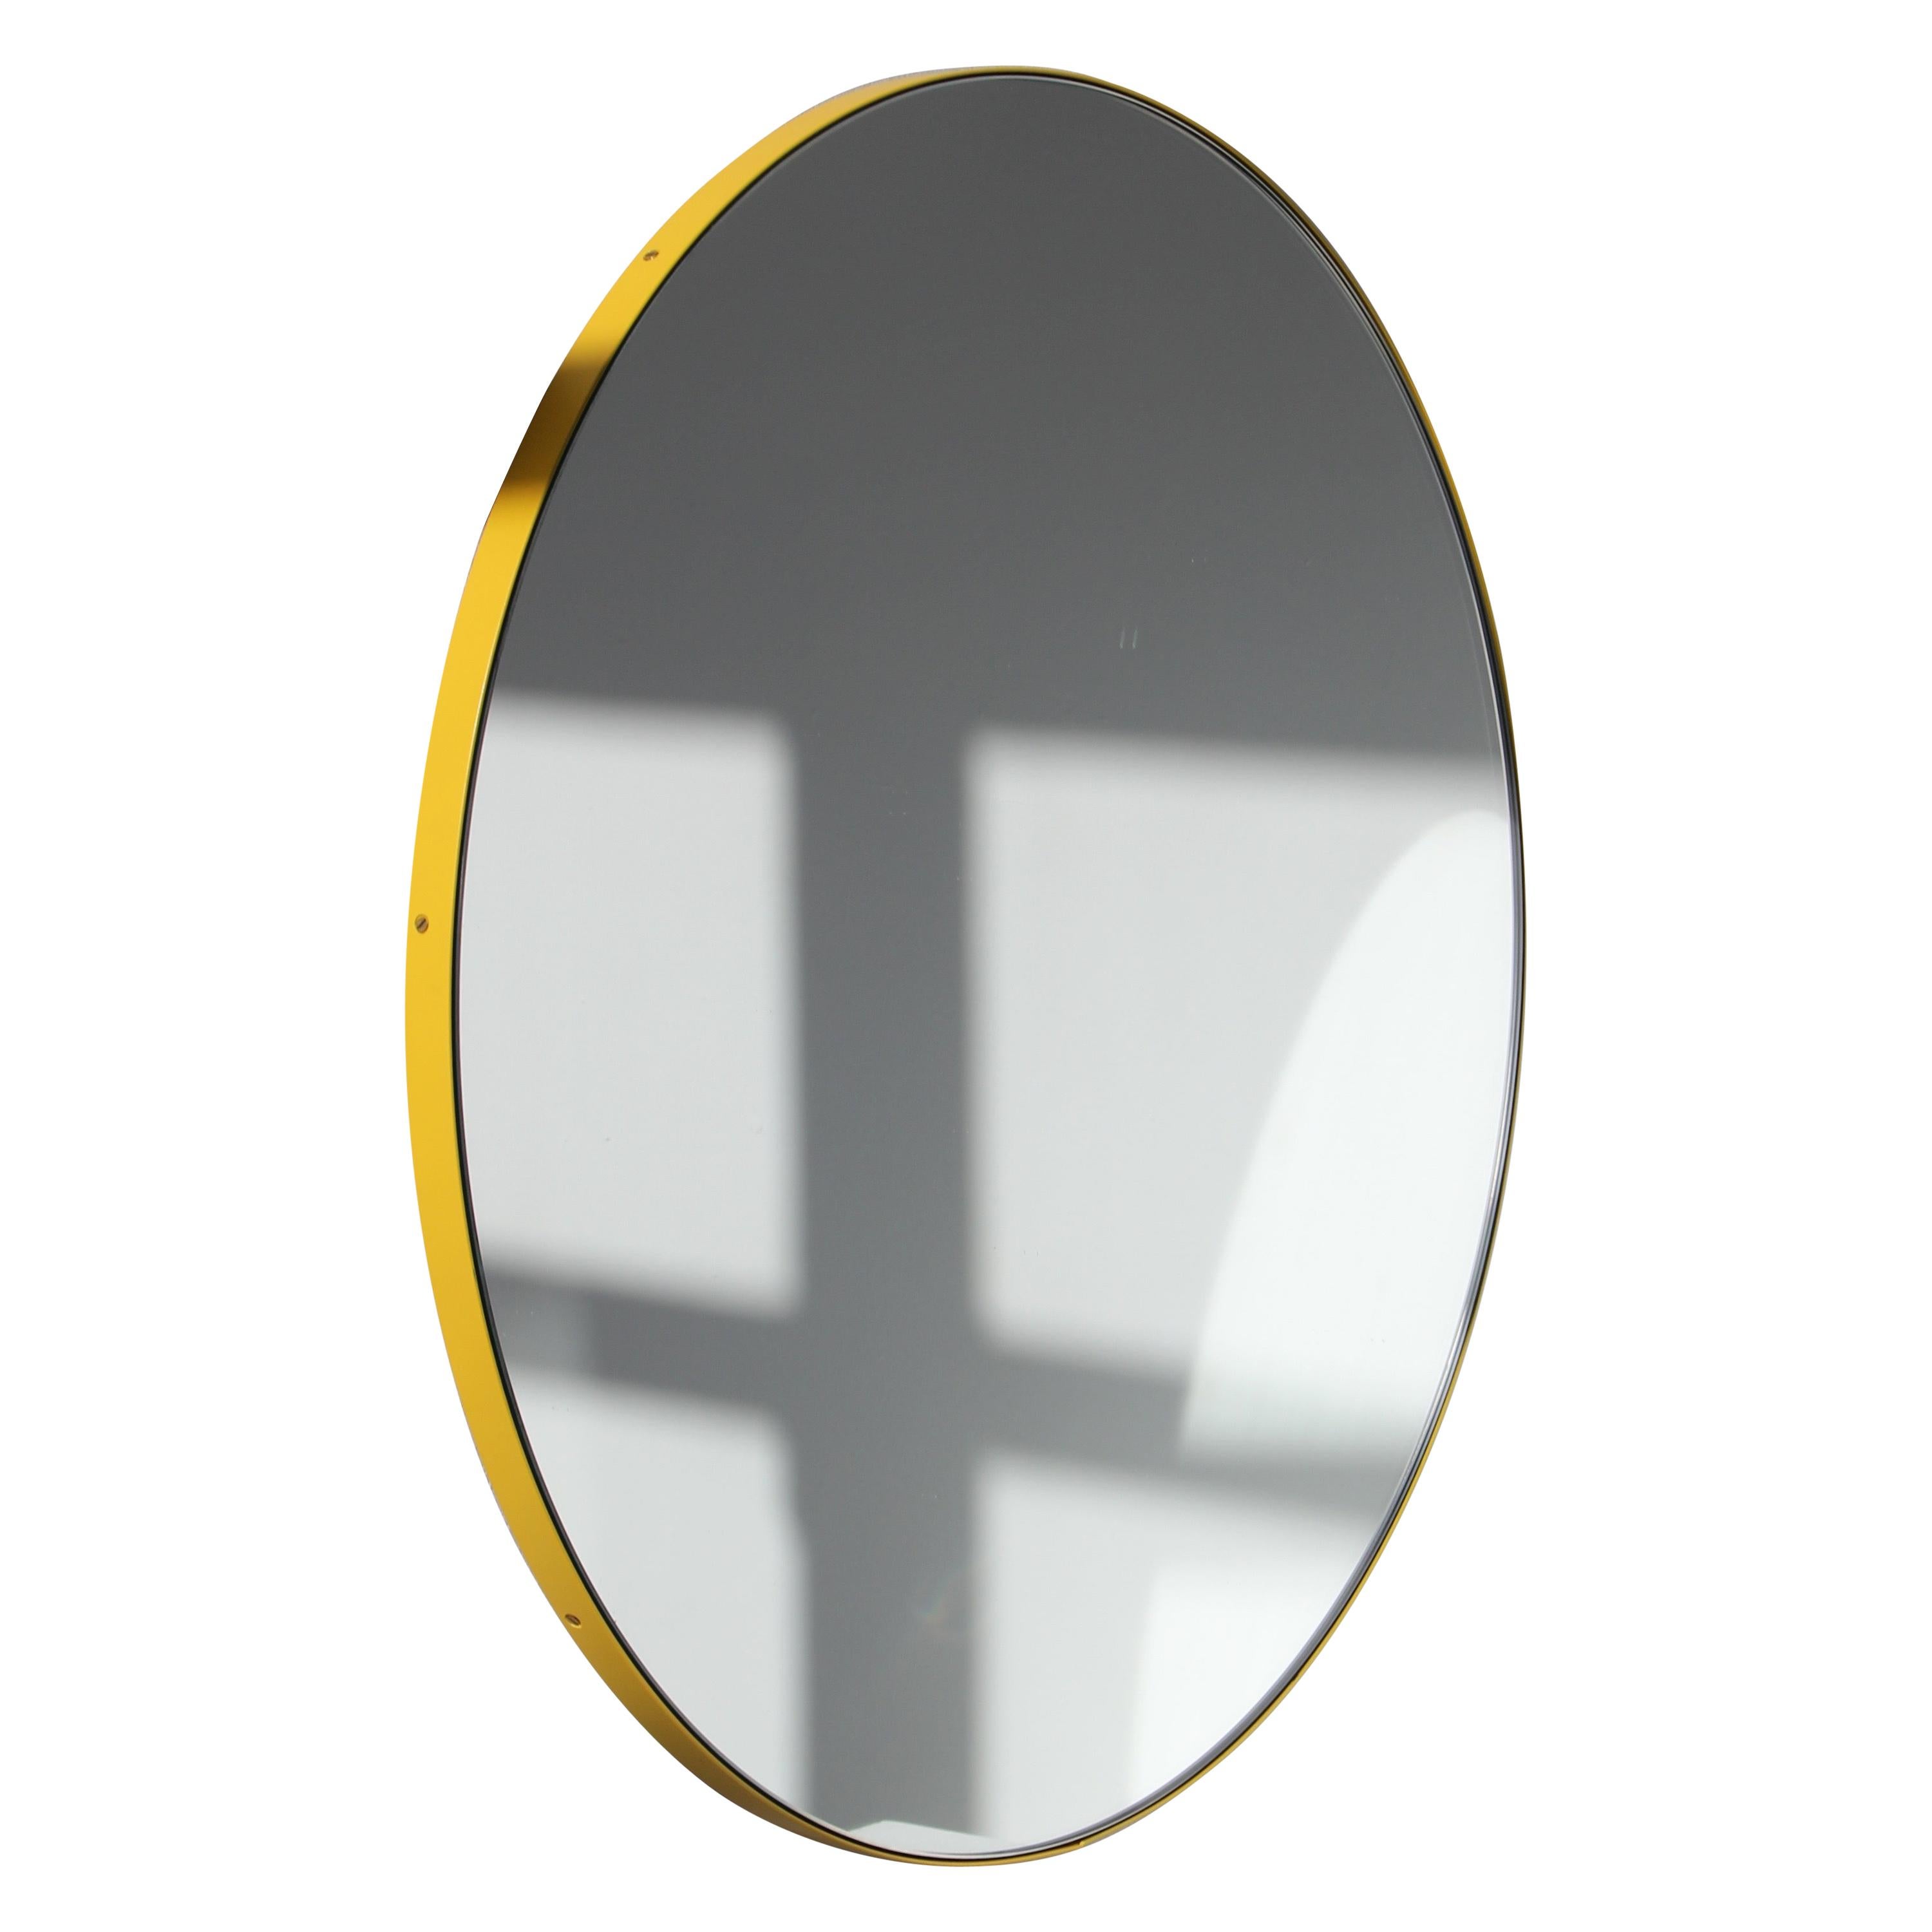 Orbis Round Mirror with Contemporary Yellow Frame, Regular For Sale